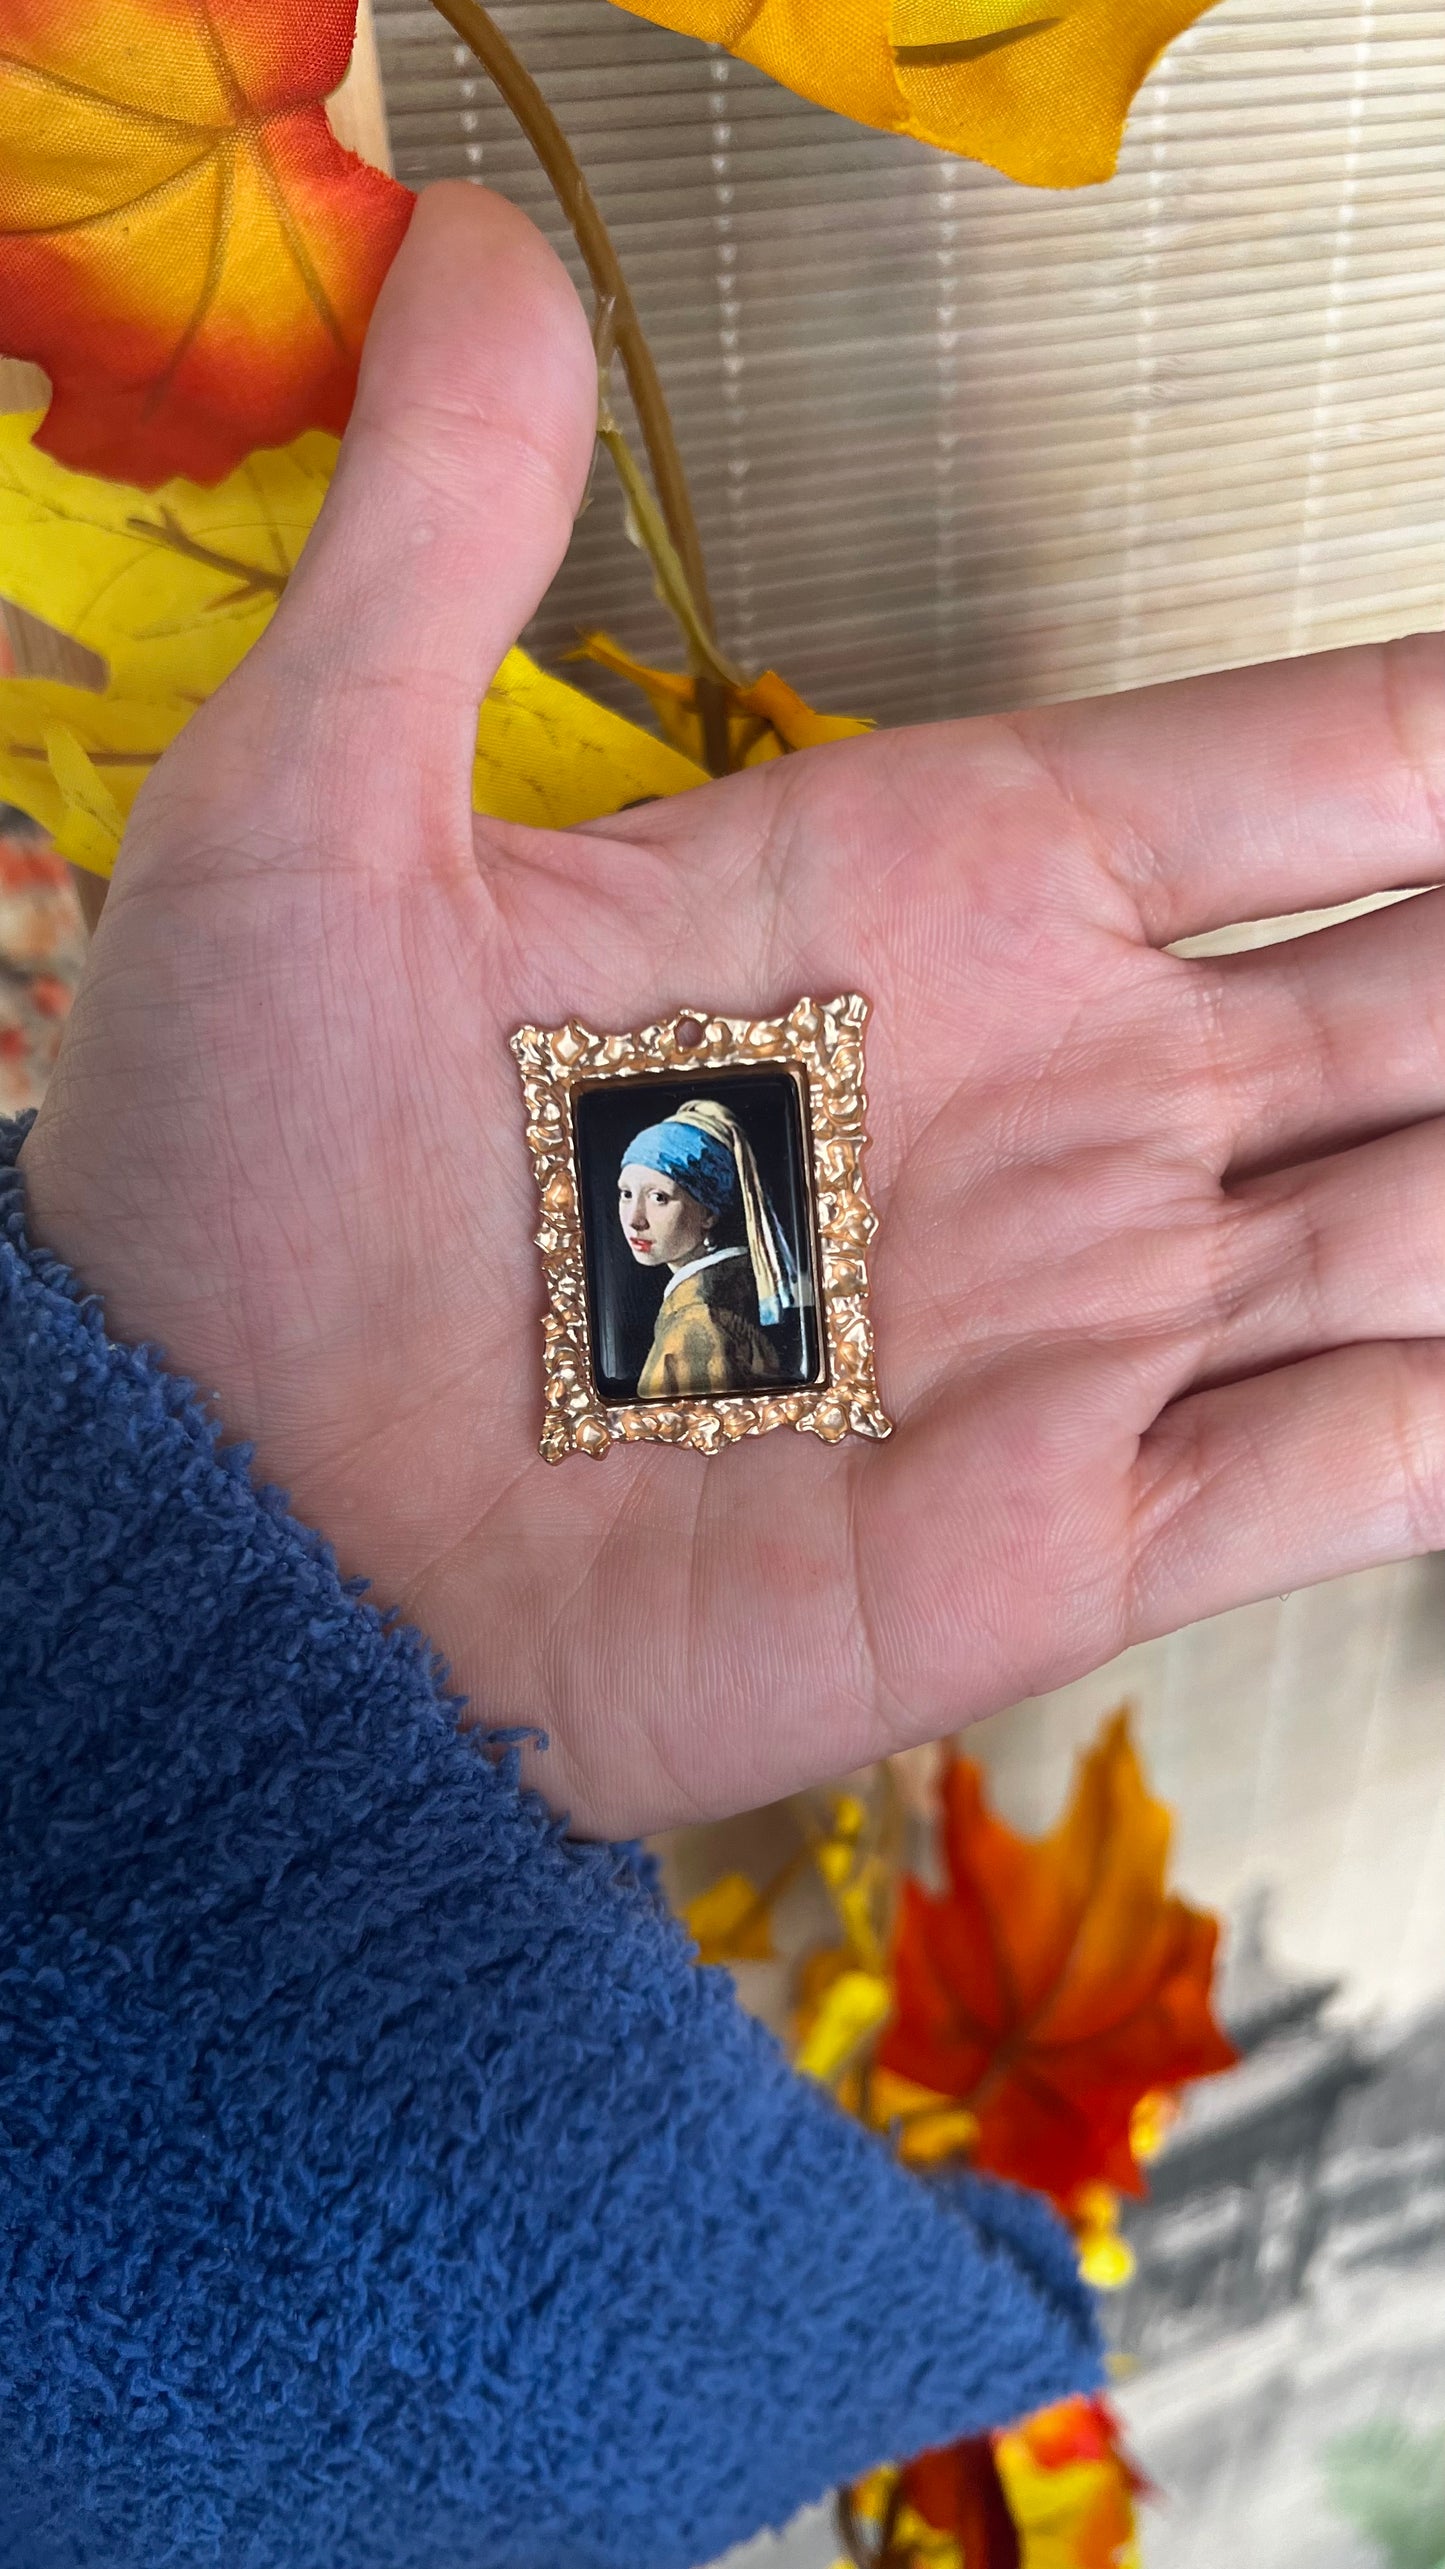 Girl With A Pearl Earring Miniature